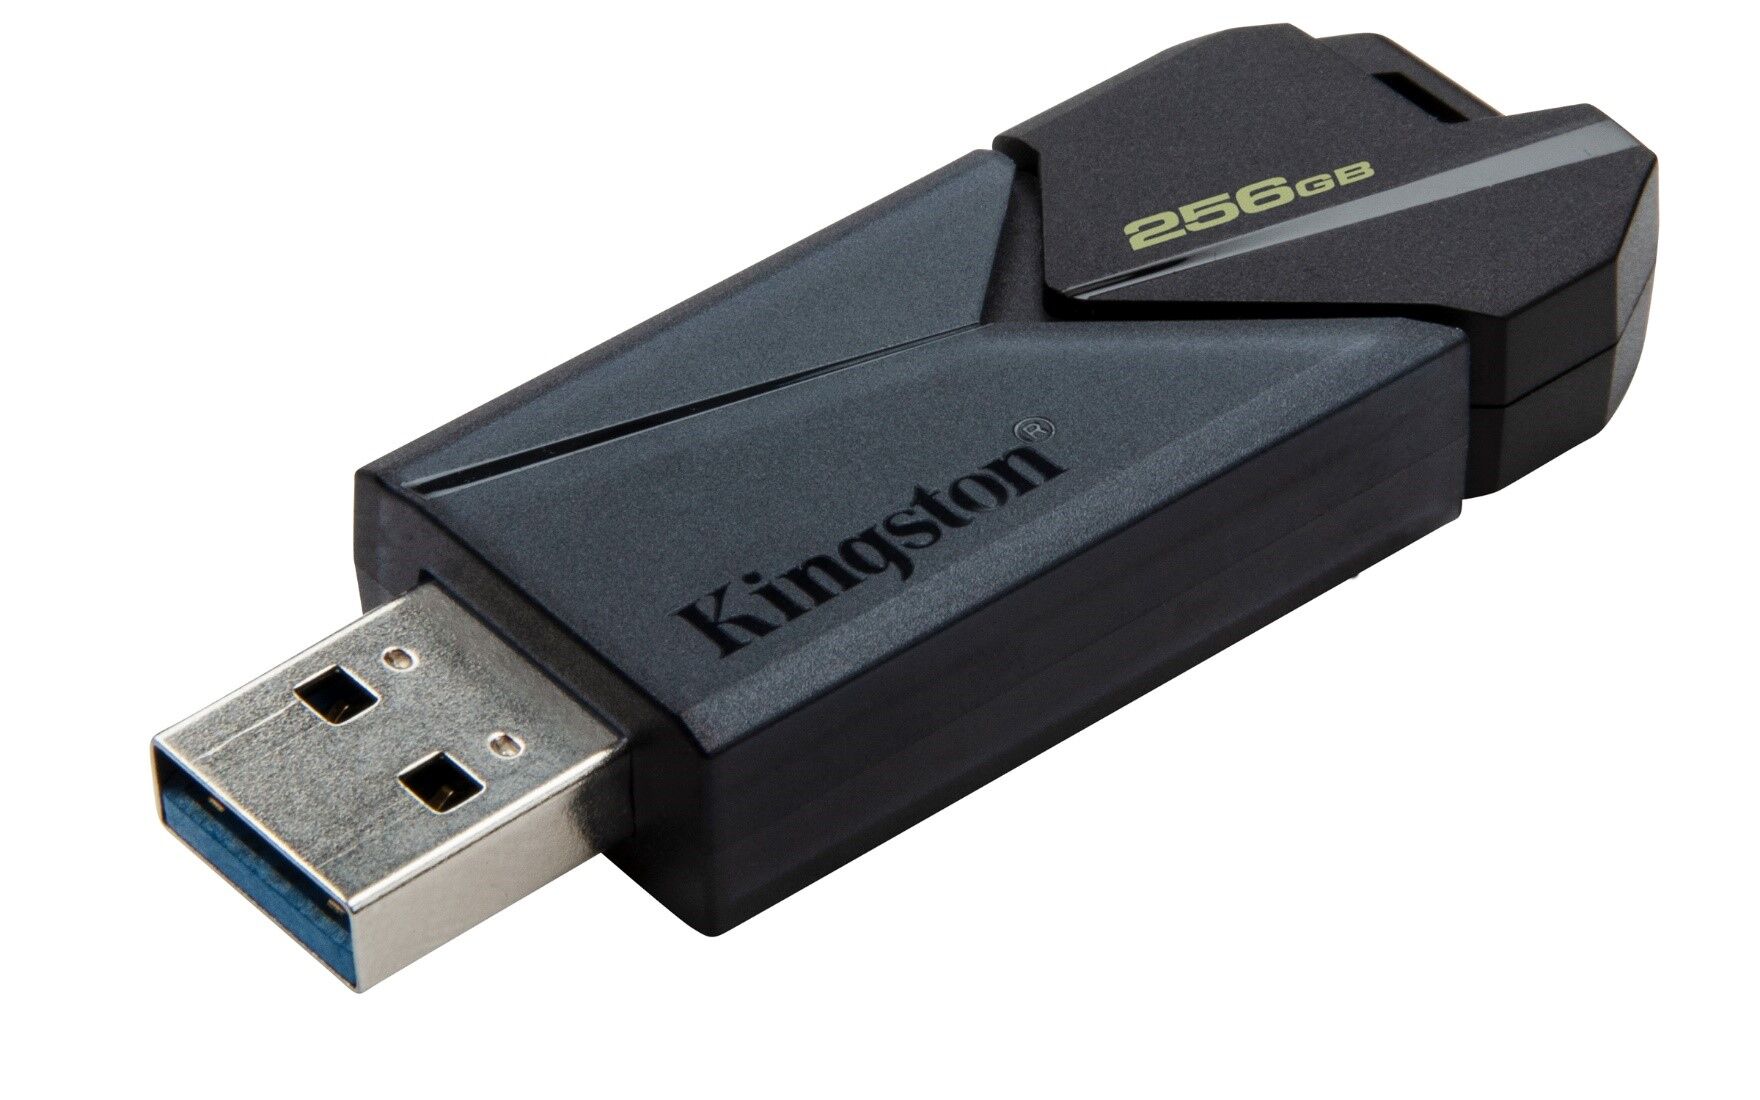 Kingston Launches Two New DataTraveler USB Drives for On-The-Go Storage 33